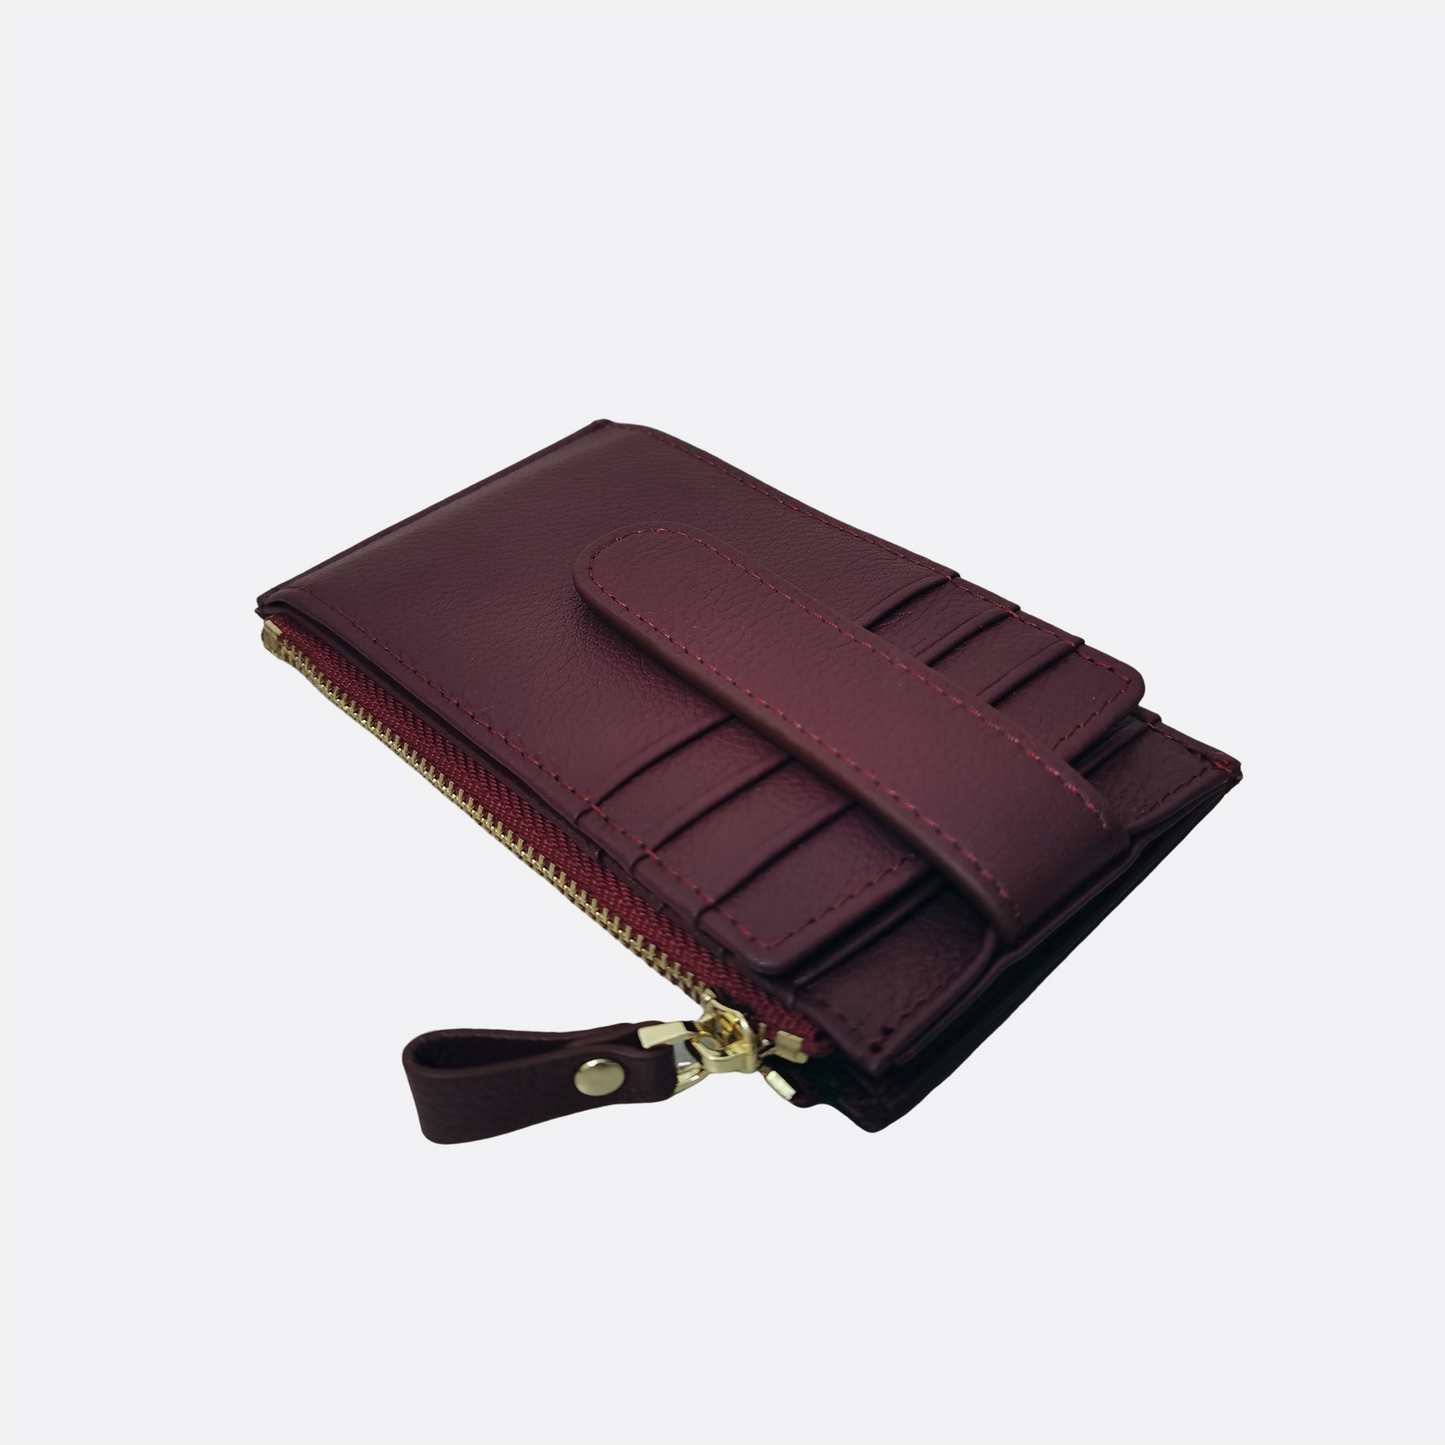 Unisex cowhide leather card holder with buckle and zip